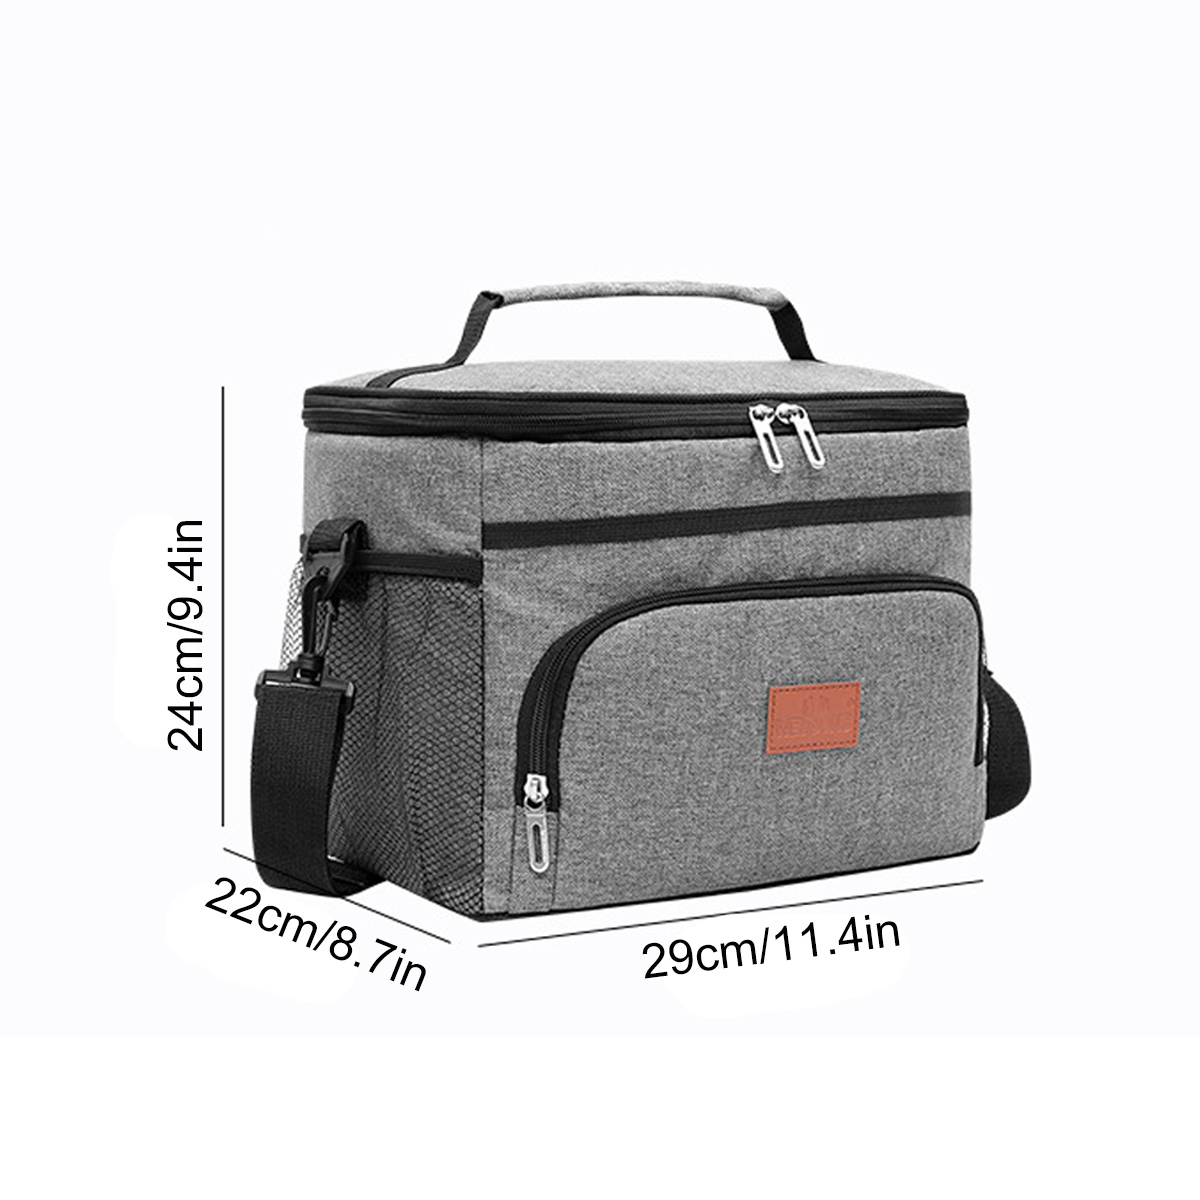 15L-Insulated-Picnic-Bag-Thermal-Food-Container-Handbag-Lunch-Bag-Outdoor-Camping-Travel-1872430-2